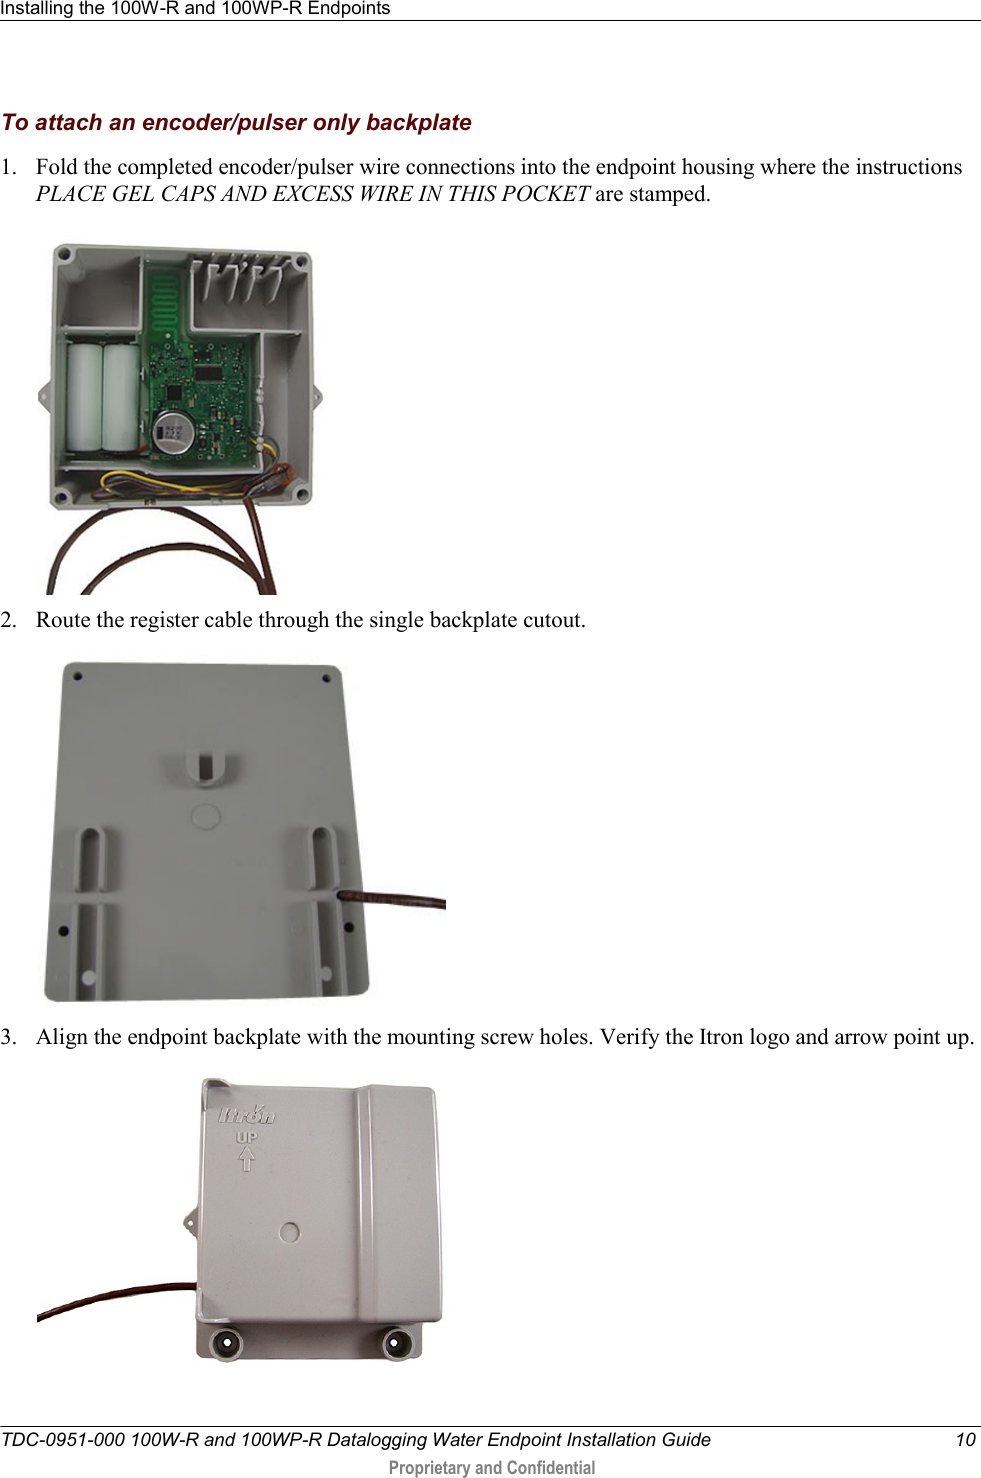 Installing the 100W-R and 100WP-R Endpoints   TDC-0951-000 100W-R and 100WP-R Datalogging Water Endpoint Installation Guide  10  Proprietary and Confidential    To attach an encoder/pulser only backplate 1. Fold the completed encoder/pulser wire connections into the endpoint housing where the instructions PLACE GEL CAPS AND EXCESS WIRE IN THIS POCKET are stamped.  2. Route the register cable through the single backplate cutout.  3. Align the endpoint backplate with the mounting screw holes. Verify the Itron logo and arrow point up.   